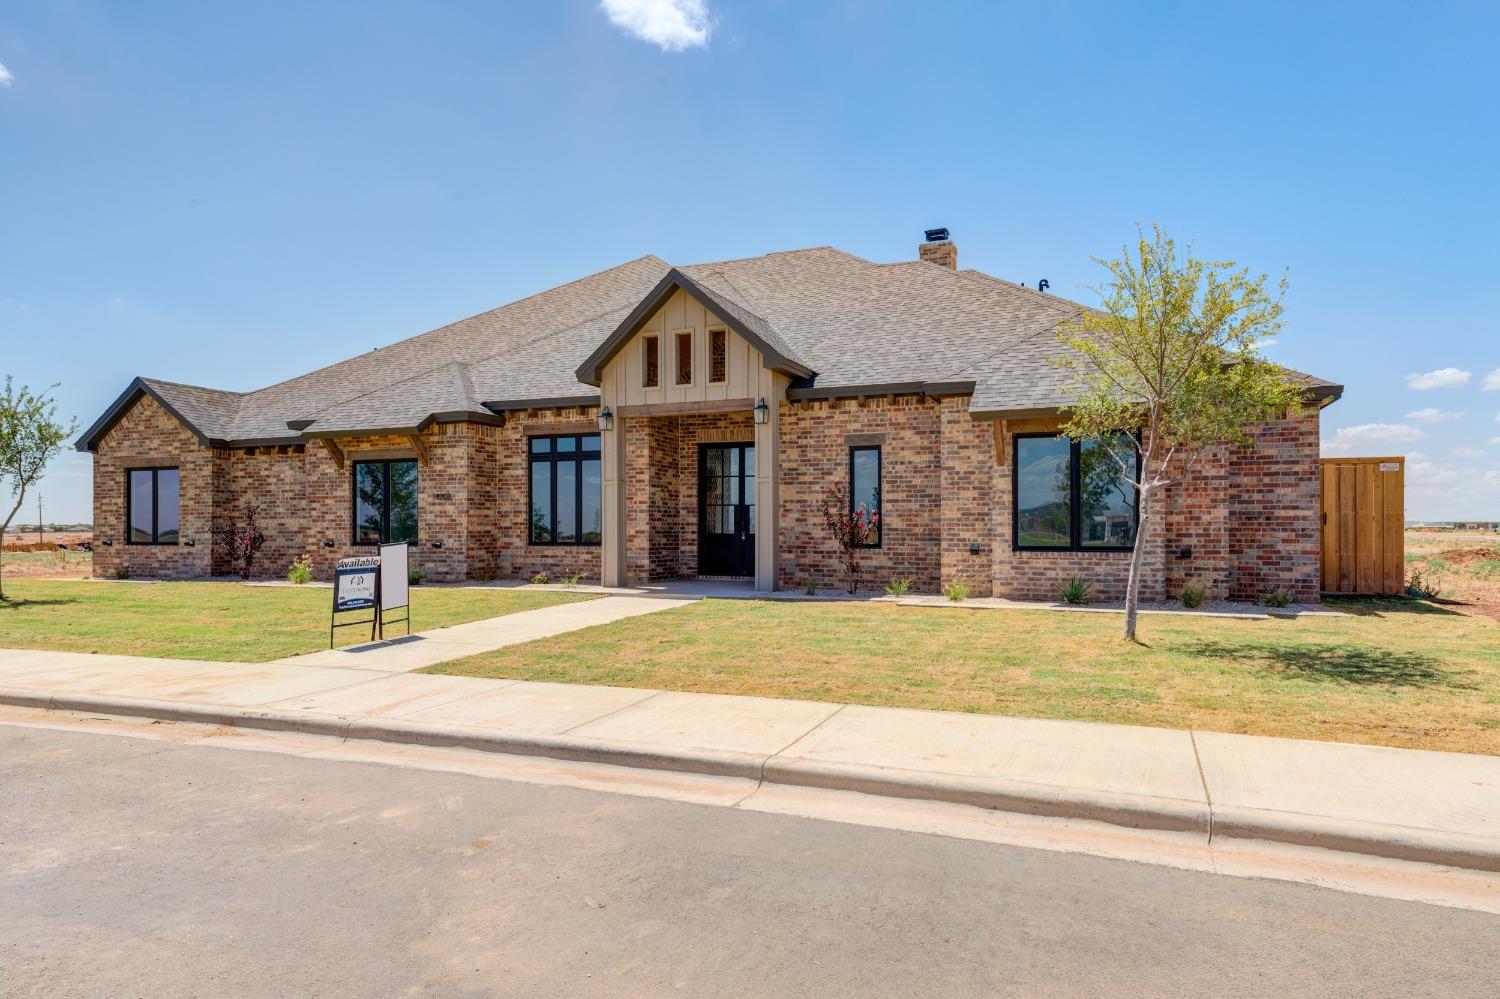 This upscale 4 bedroom, 3.5 bathroom built by Trey Strong Custom homes is a luxurious and spacious home that is located in the award-winning Lubbock Cooper School District. The home boasts many high-end features, including beautiful hardwood floors and quartz countertops throughout. The home also includes two separate living areas, which provide ample space for relaxation and entertainment. Additionally, there is a safe room located within the home, which provides peace of mind and added security. One of the standout features of this home is its custom millwork and trim, which add an extra level of detail and sophistication to the overall design. The primary suite is isolated, providing privacy and tranquility for the homeowner. The large outdoor living space complete with a fireplace and cooking area is perfect for enjoying the beautiful Texas sunsets. This home is a stunning example of luxury  living in Stratford Pointe where you'll make lasting memories.